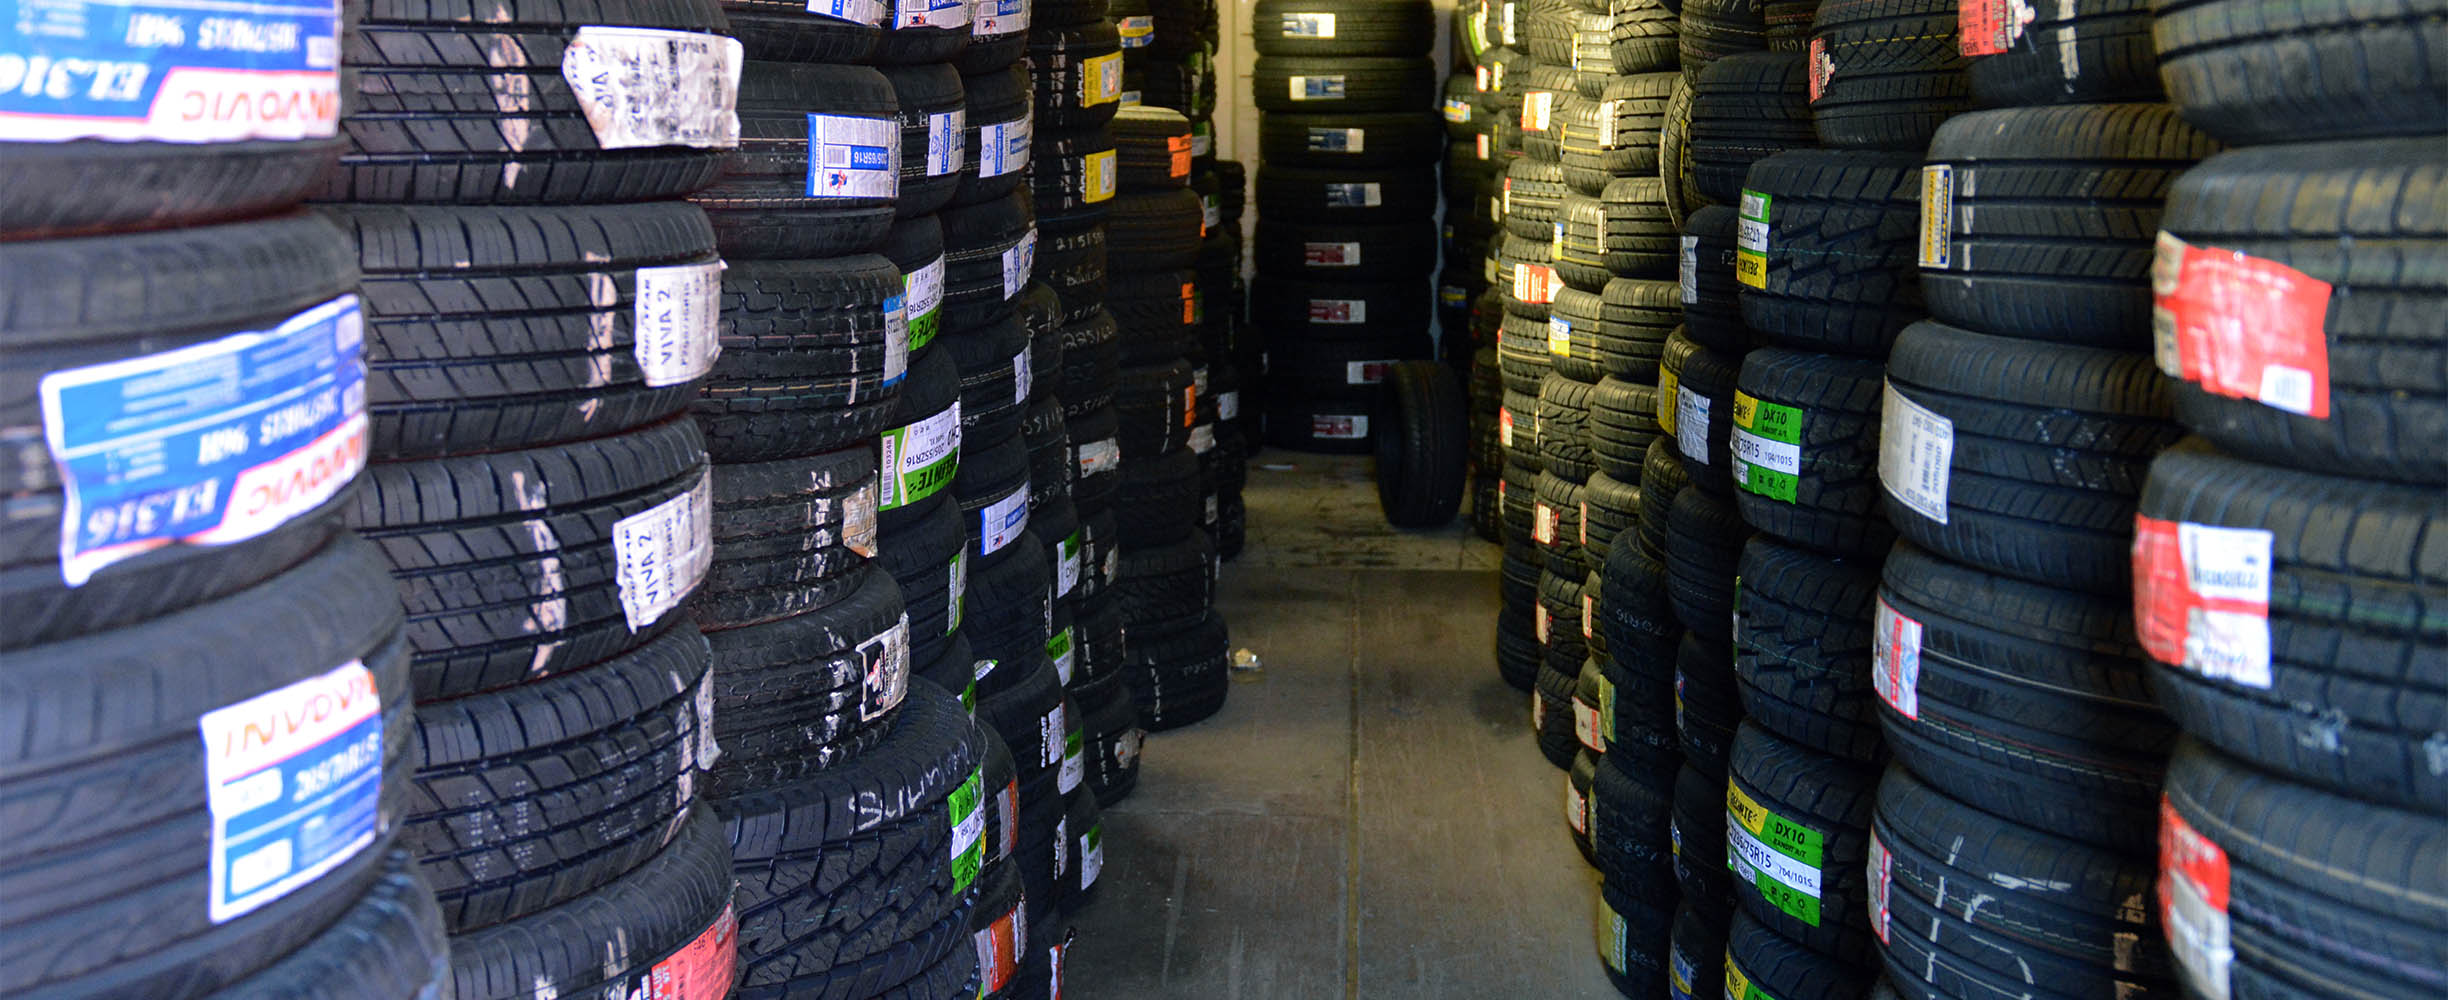 Complete tires service at a fair price.